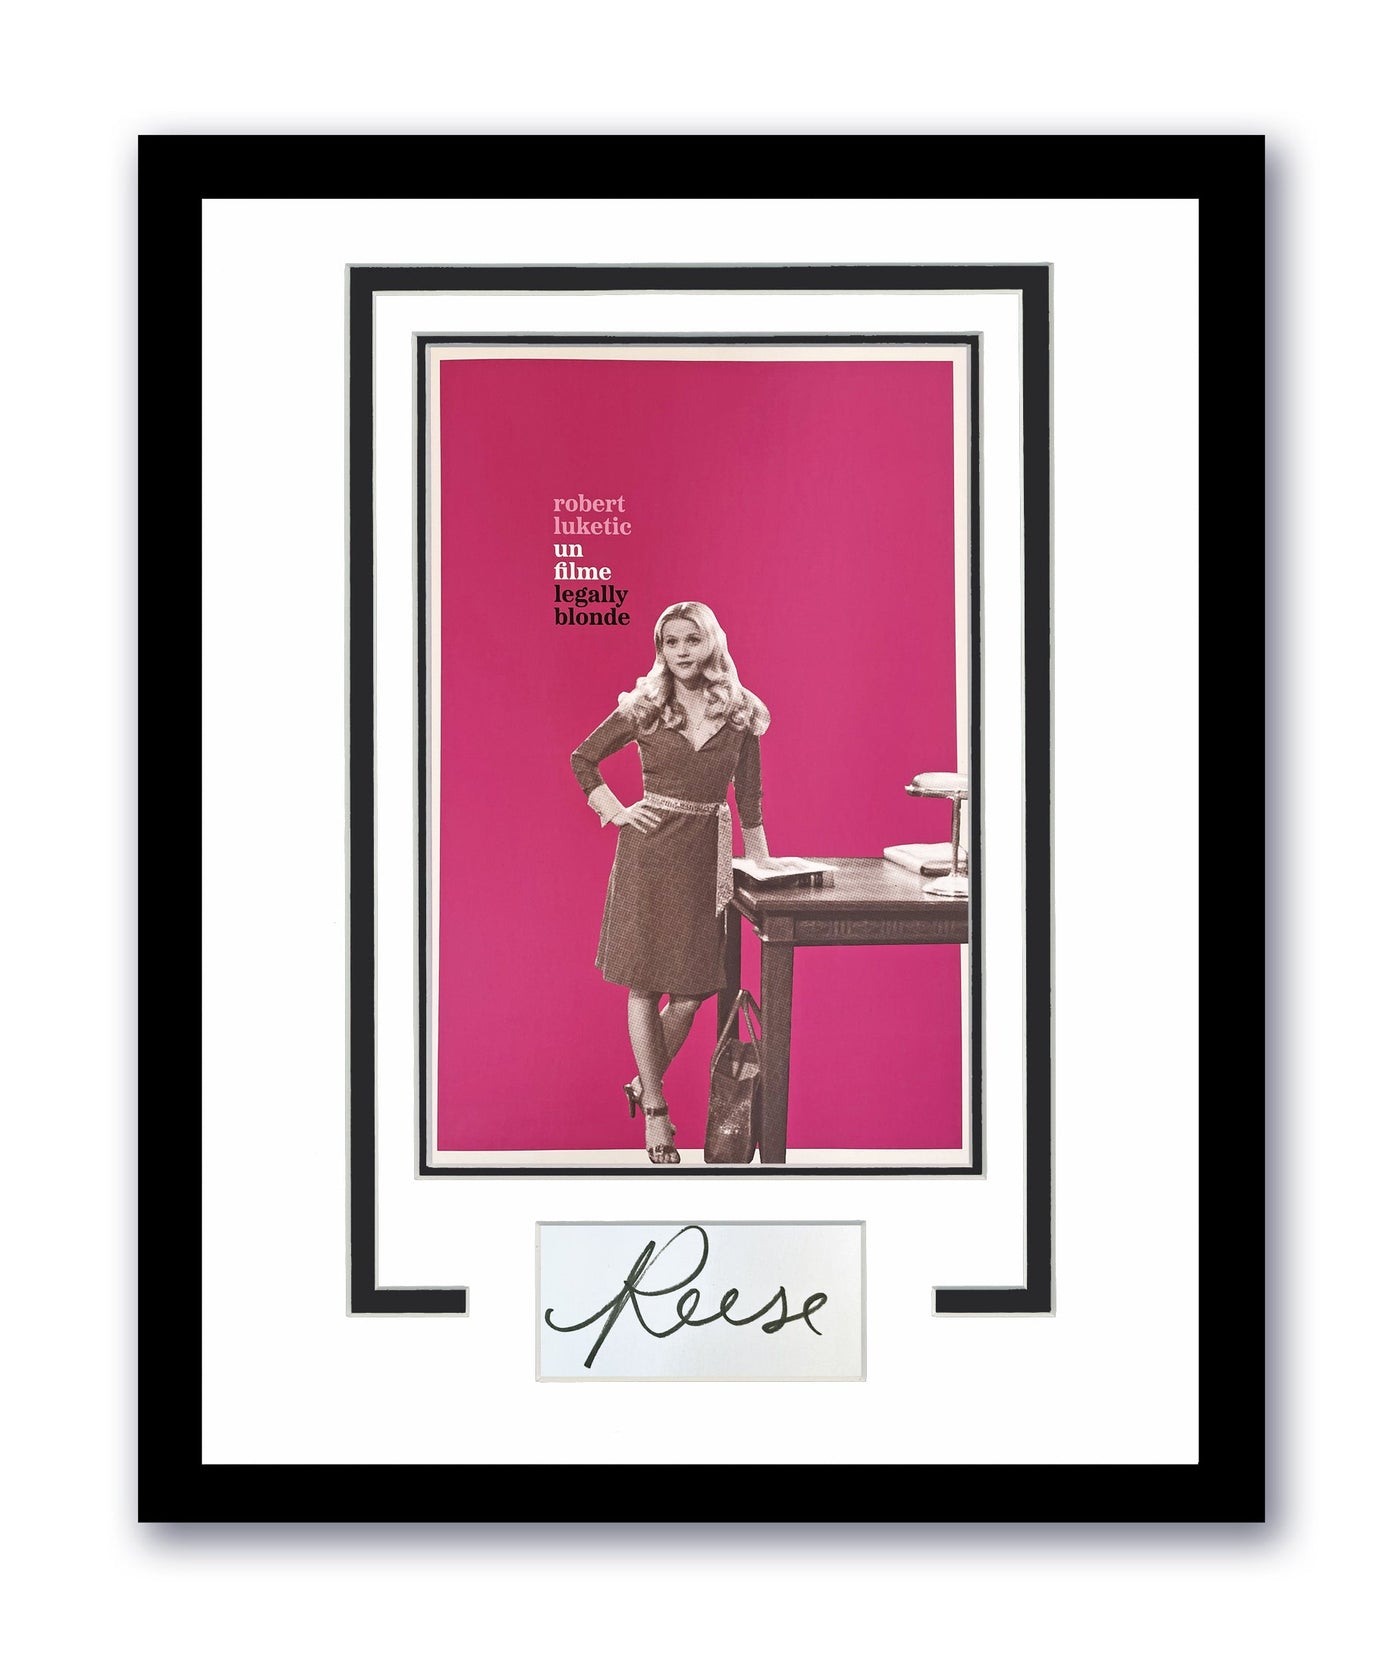 Legally Blonde Reese Witherspoon Autographed Signed 11x14 Framed Photo Poster